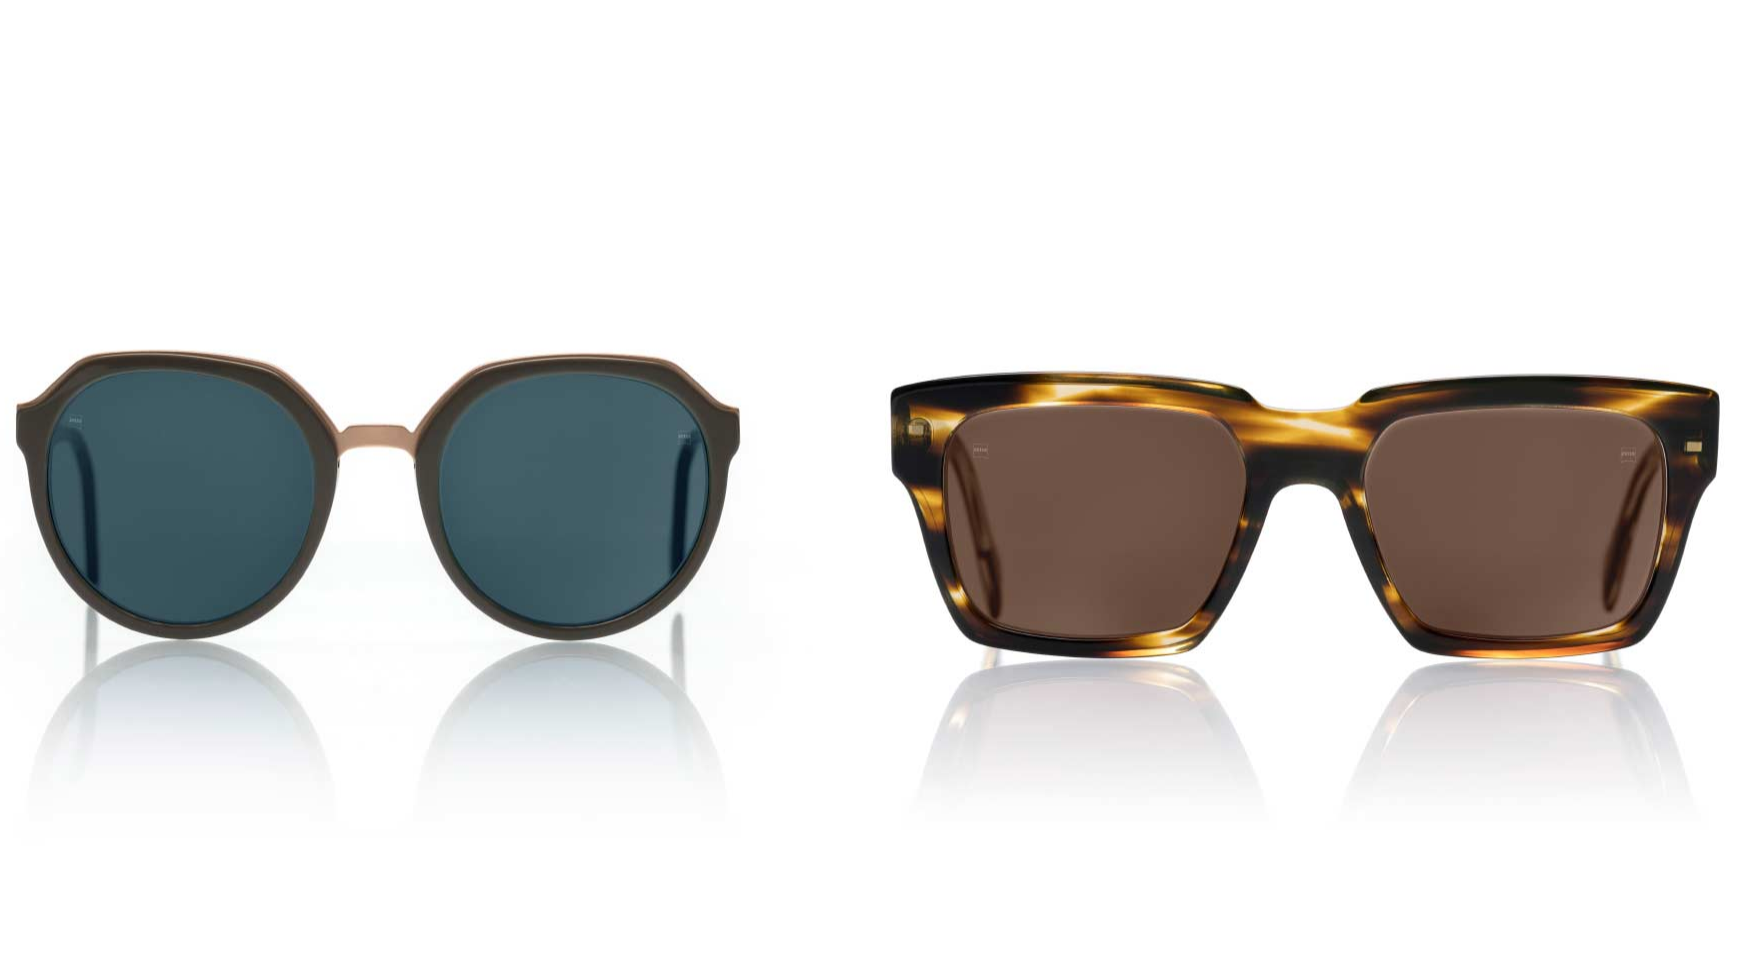 ZEISS PhotoFusion X, are available in natural, modern colours – just like normal sun lenses